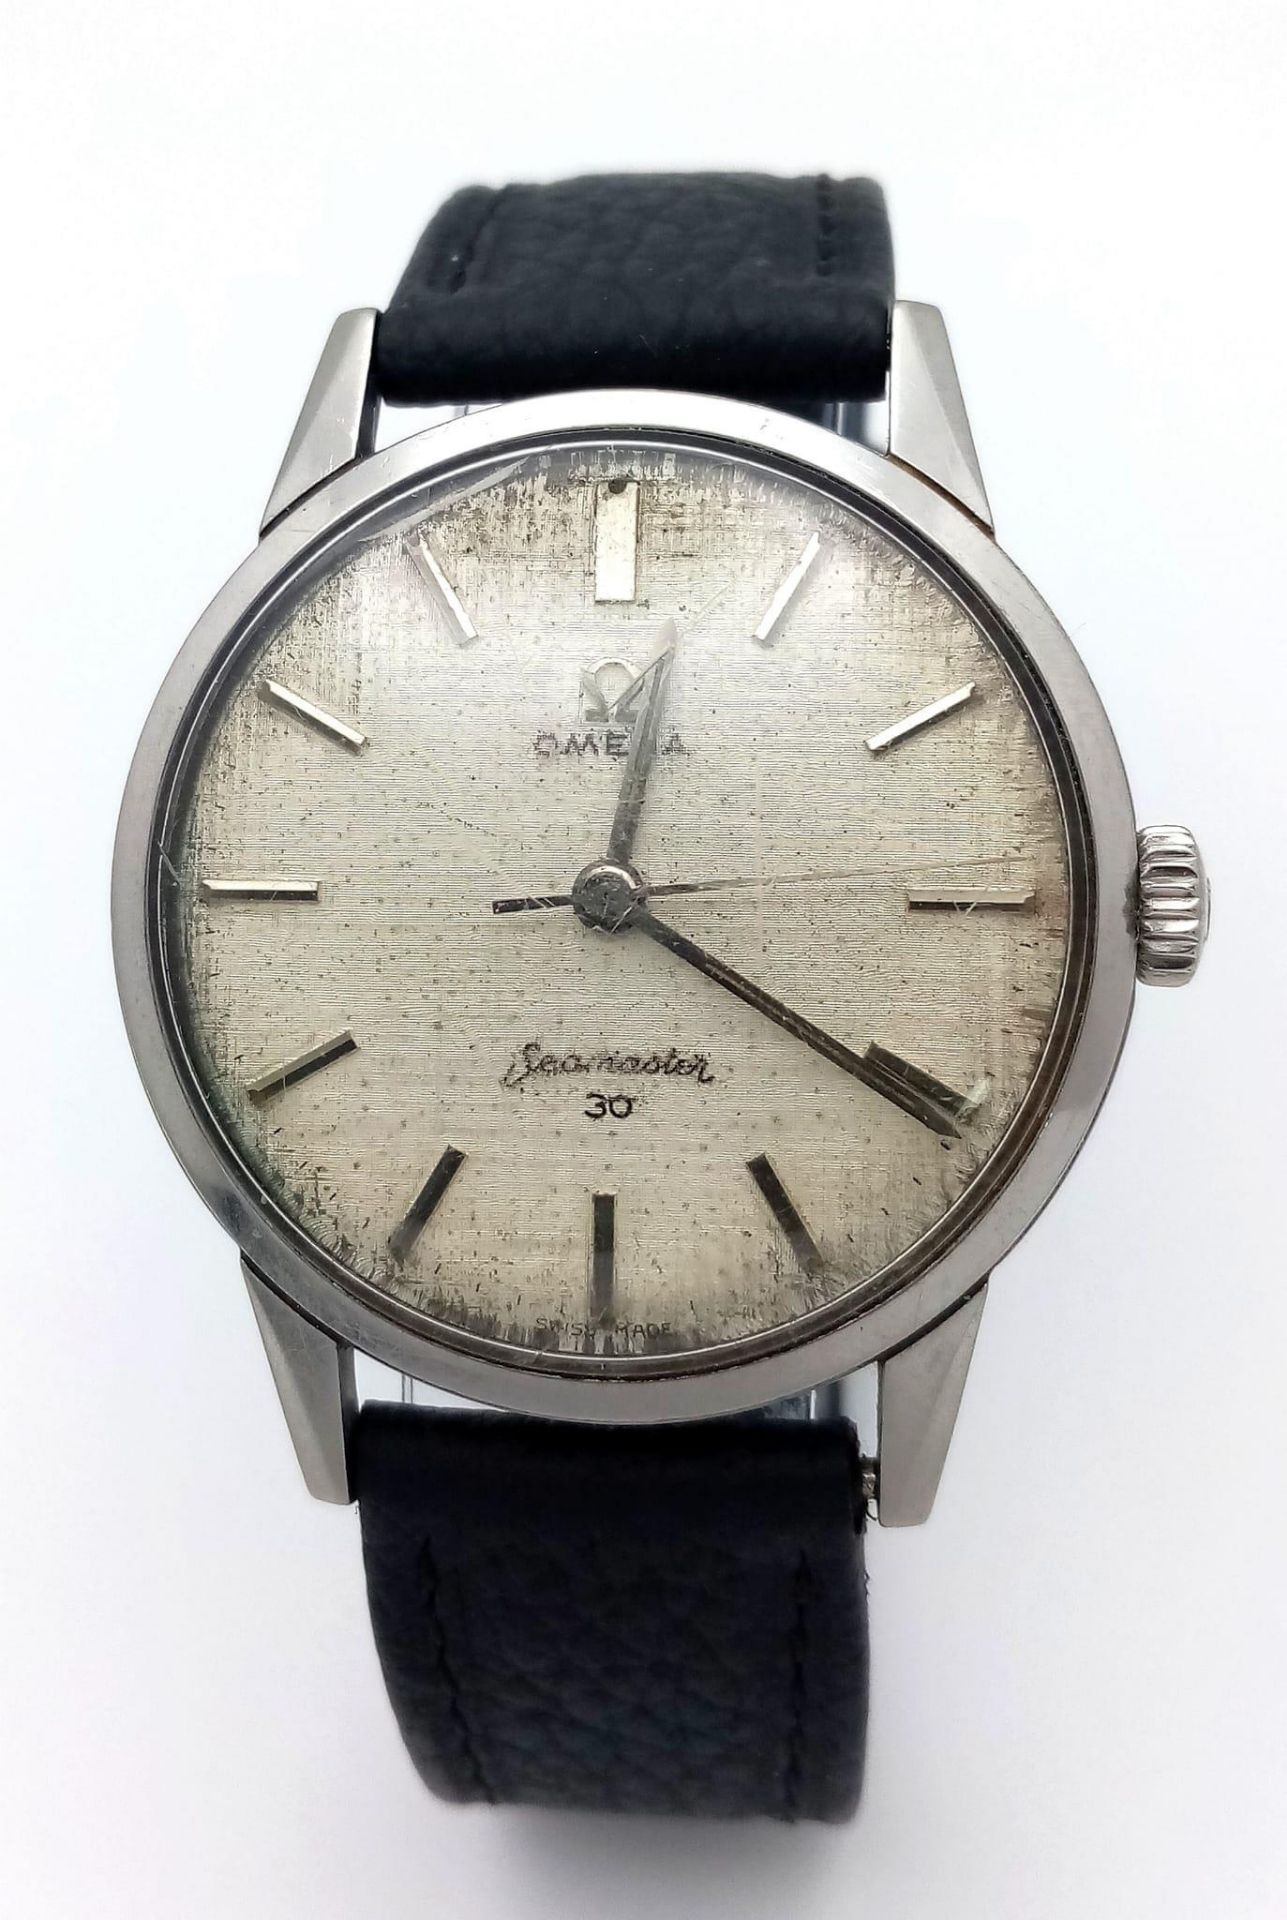 A Classic Omega Seamaster 30 Vintage 1960s Gents Watch. Black leather strap. Stainless steel case - - Image 3 of 7